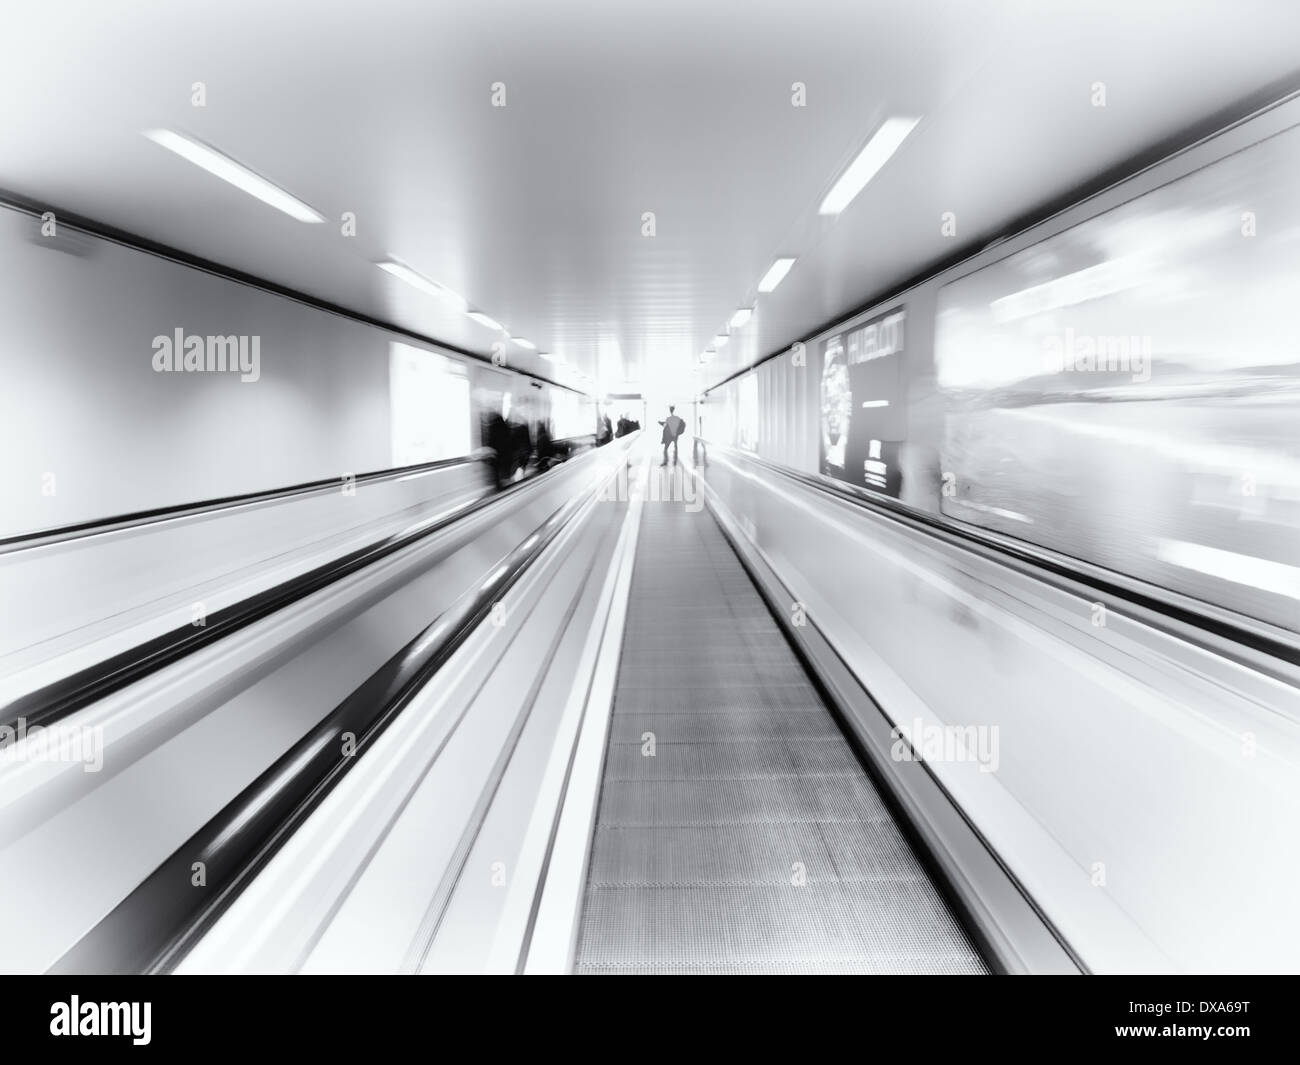 Person on a moving through a tunnel walkway escalator Stock Photo